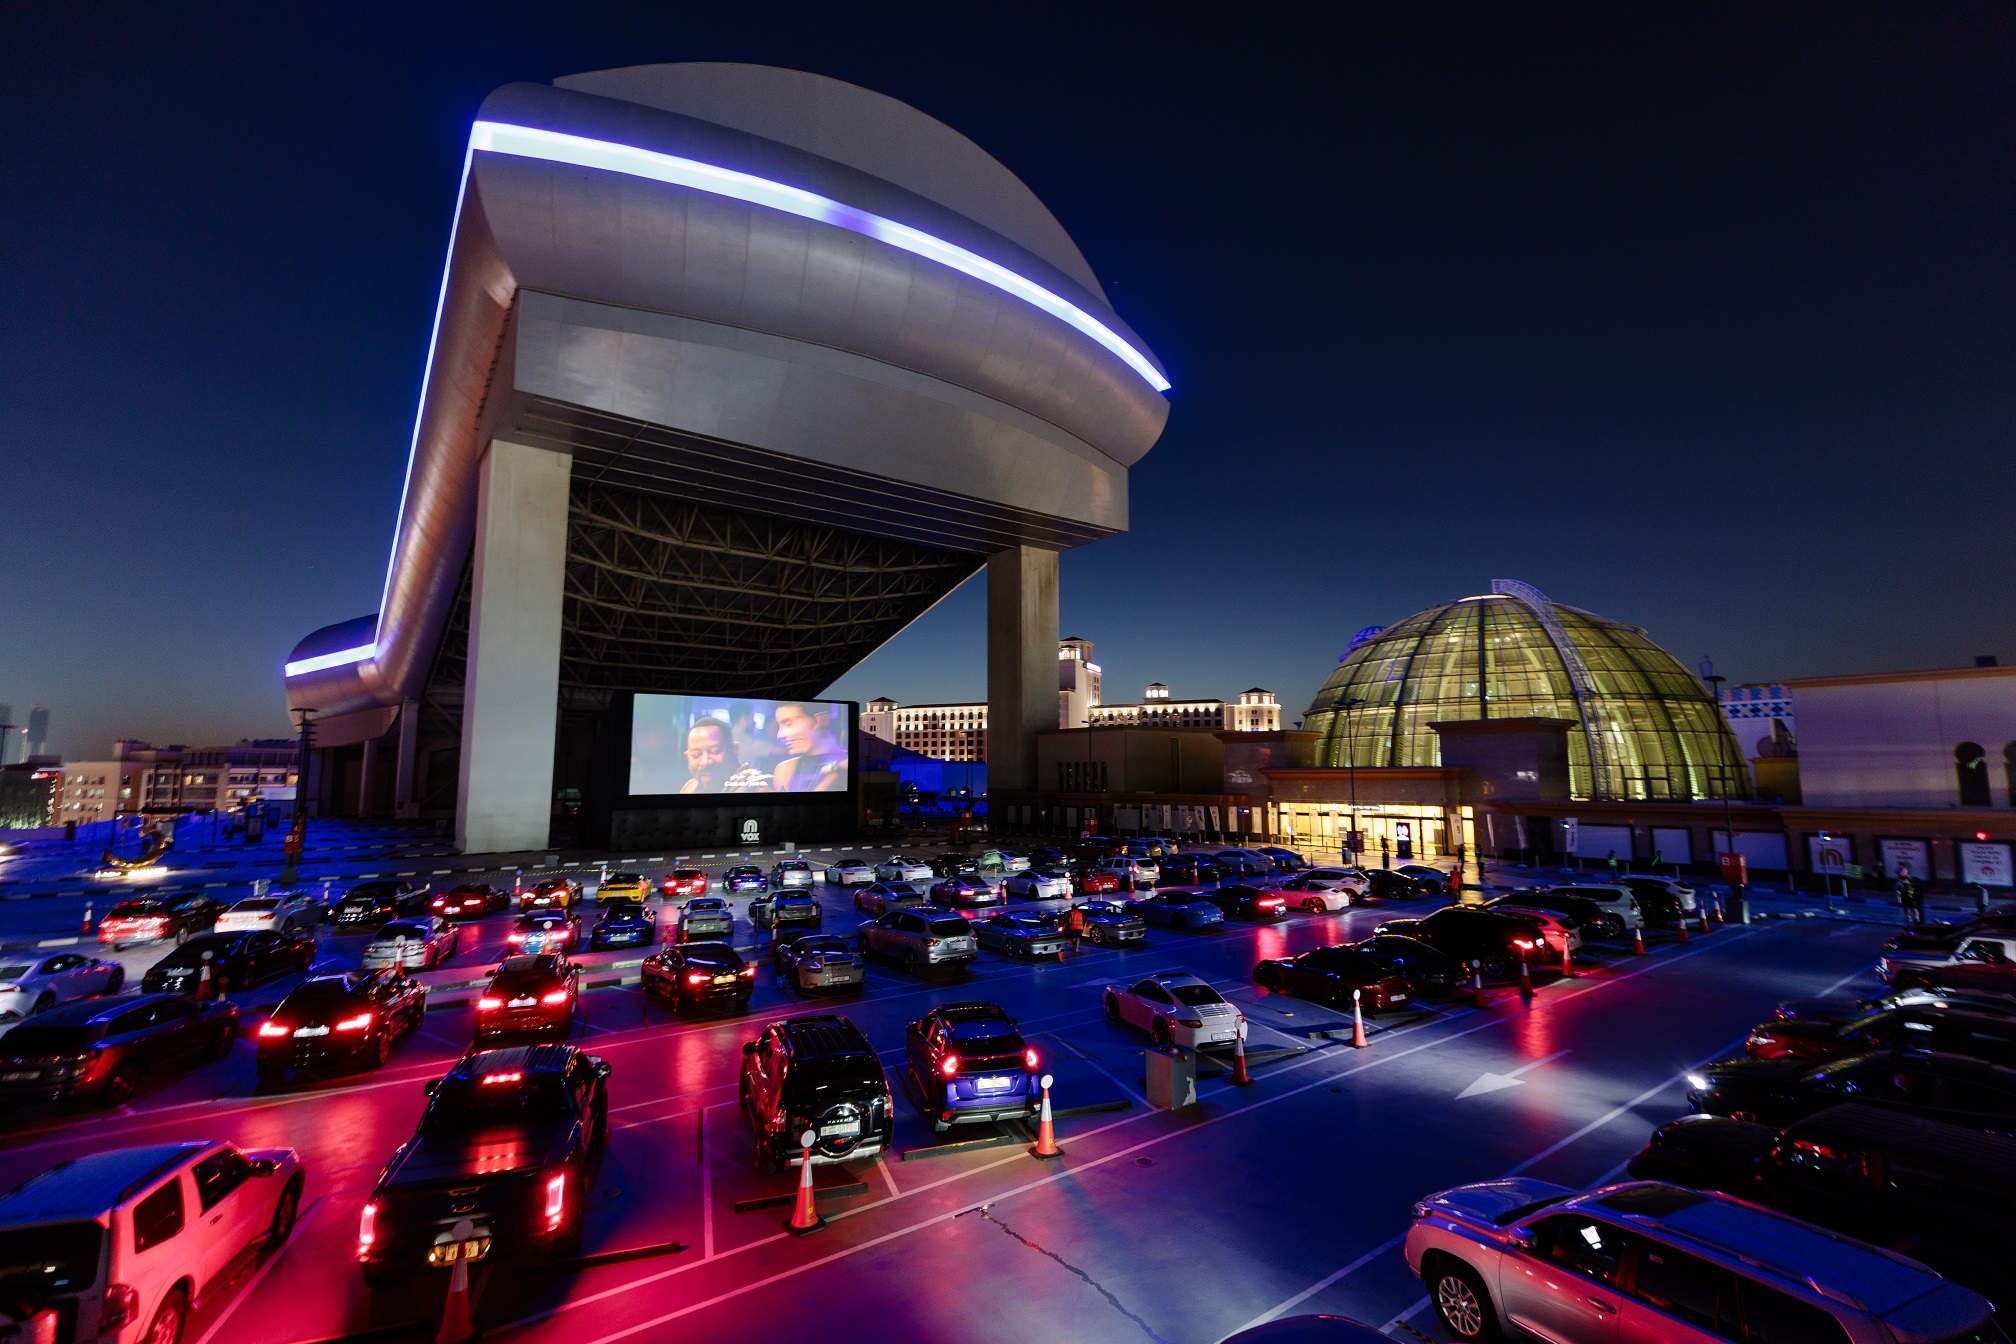 Majid Al Futtaim brings back the big screen experience by launching VOX Cinemas Drive-in at Mall of the Emirates